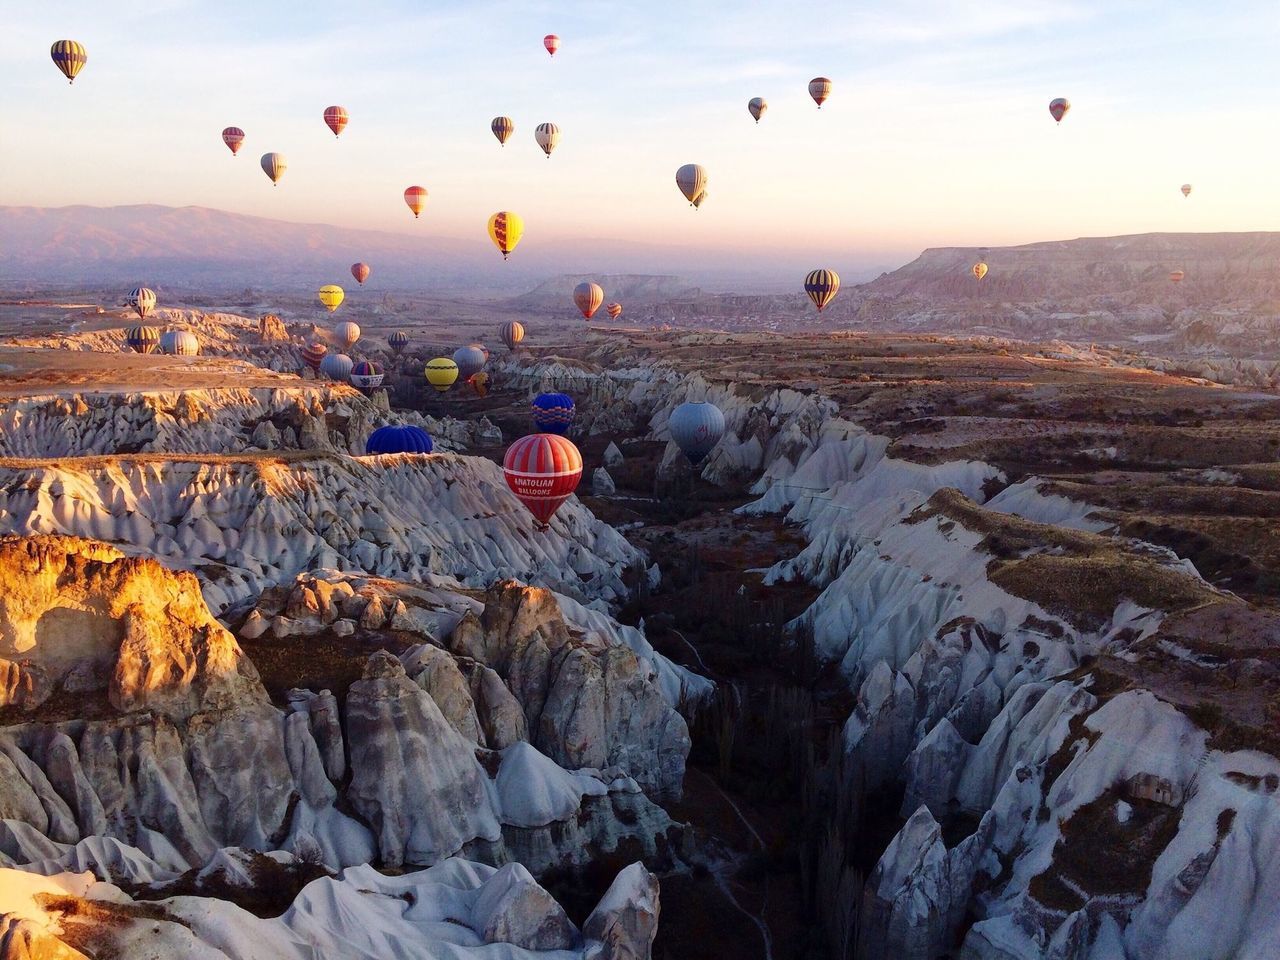 flying, mountain, scenics, mid-air, landscape, beauty in nature, sky, tranquil scene, sun, tranquility, nature, rock - object, sunset, rock formation, sunlight, hot air balloon, travel, mountain range, physical geography, idyllic